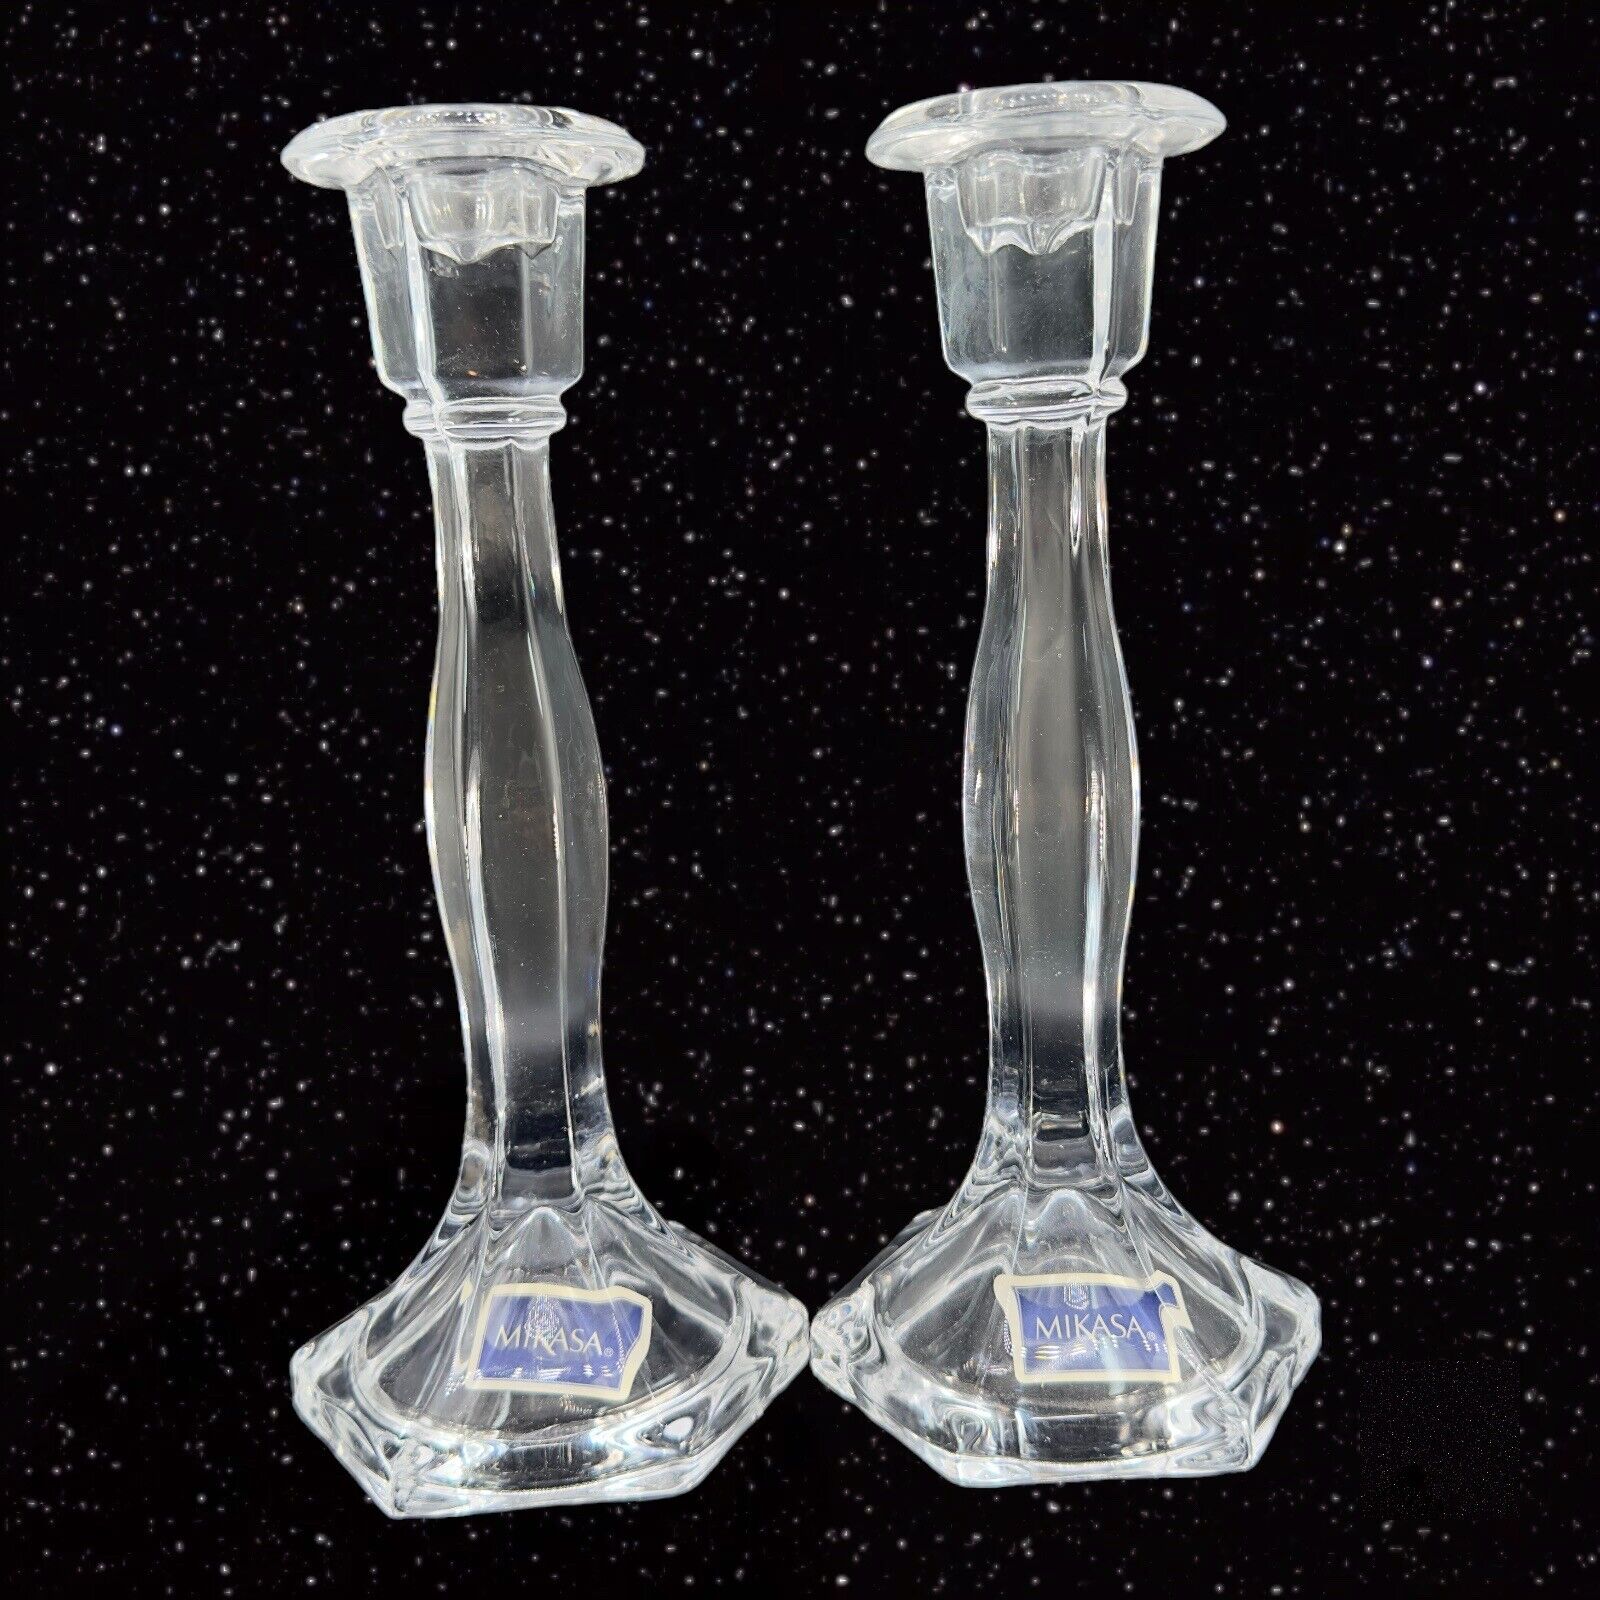 MIKASA Clear Glass Crystal Taper Candle Stick Holder Pair Set 2 Monticello 9inch